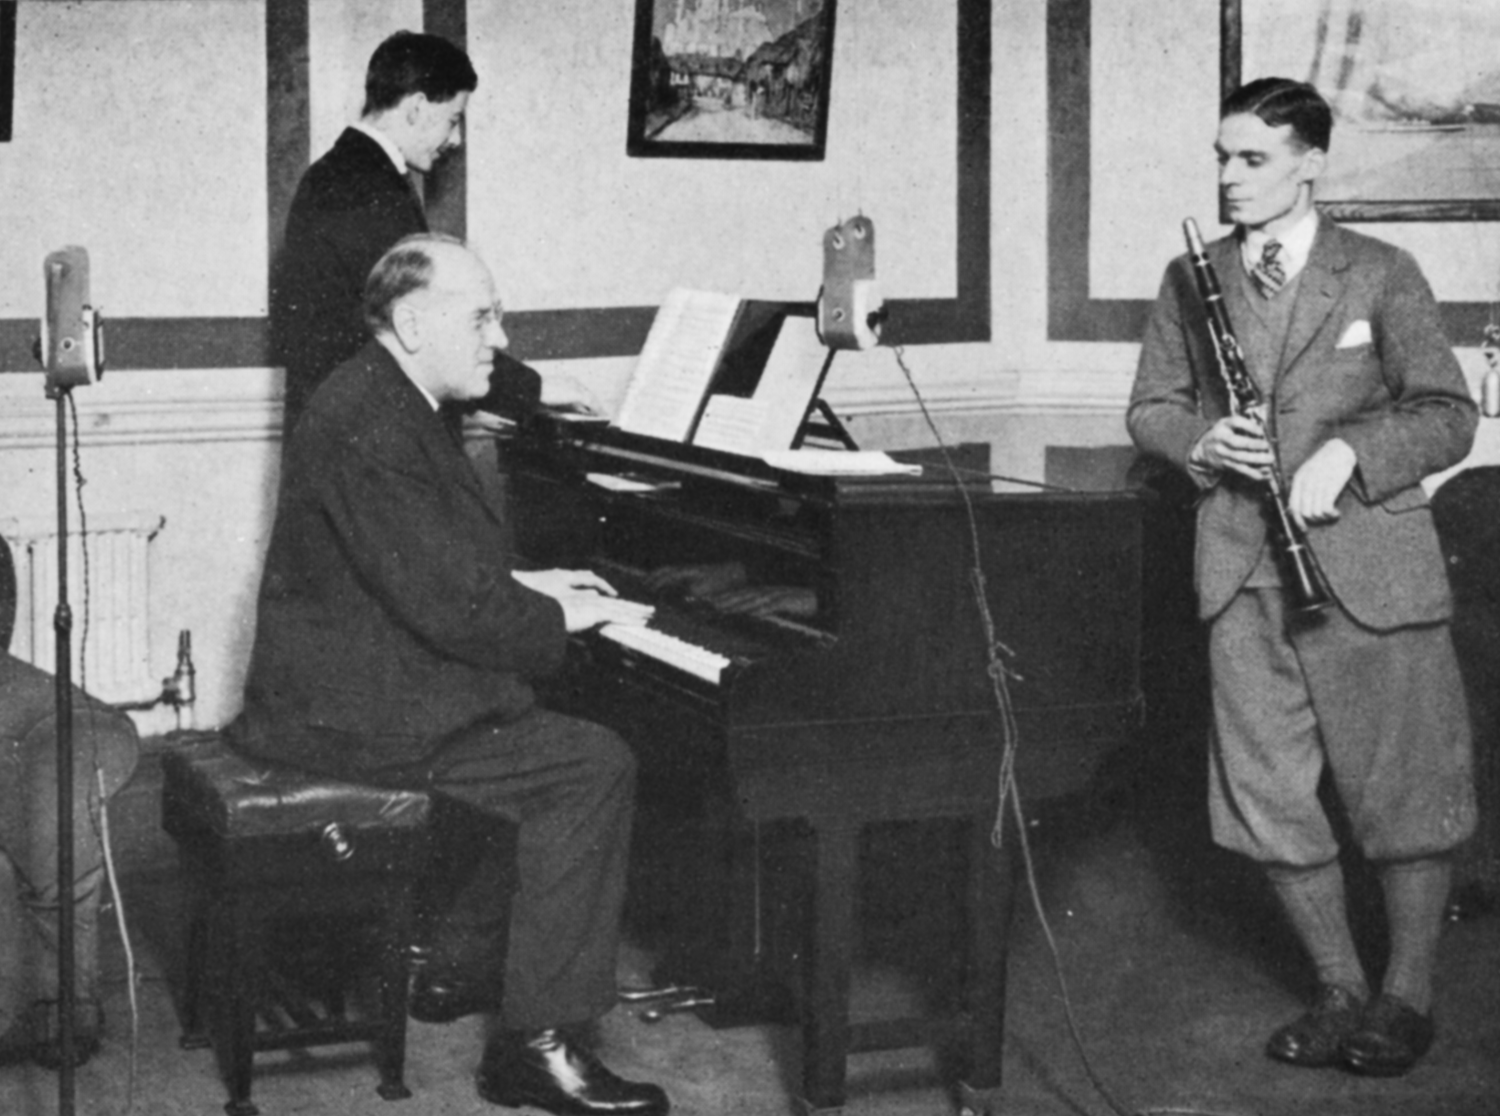 A man plays a piano as another holds an clarinet